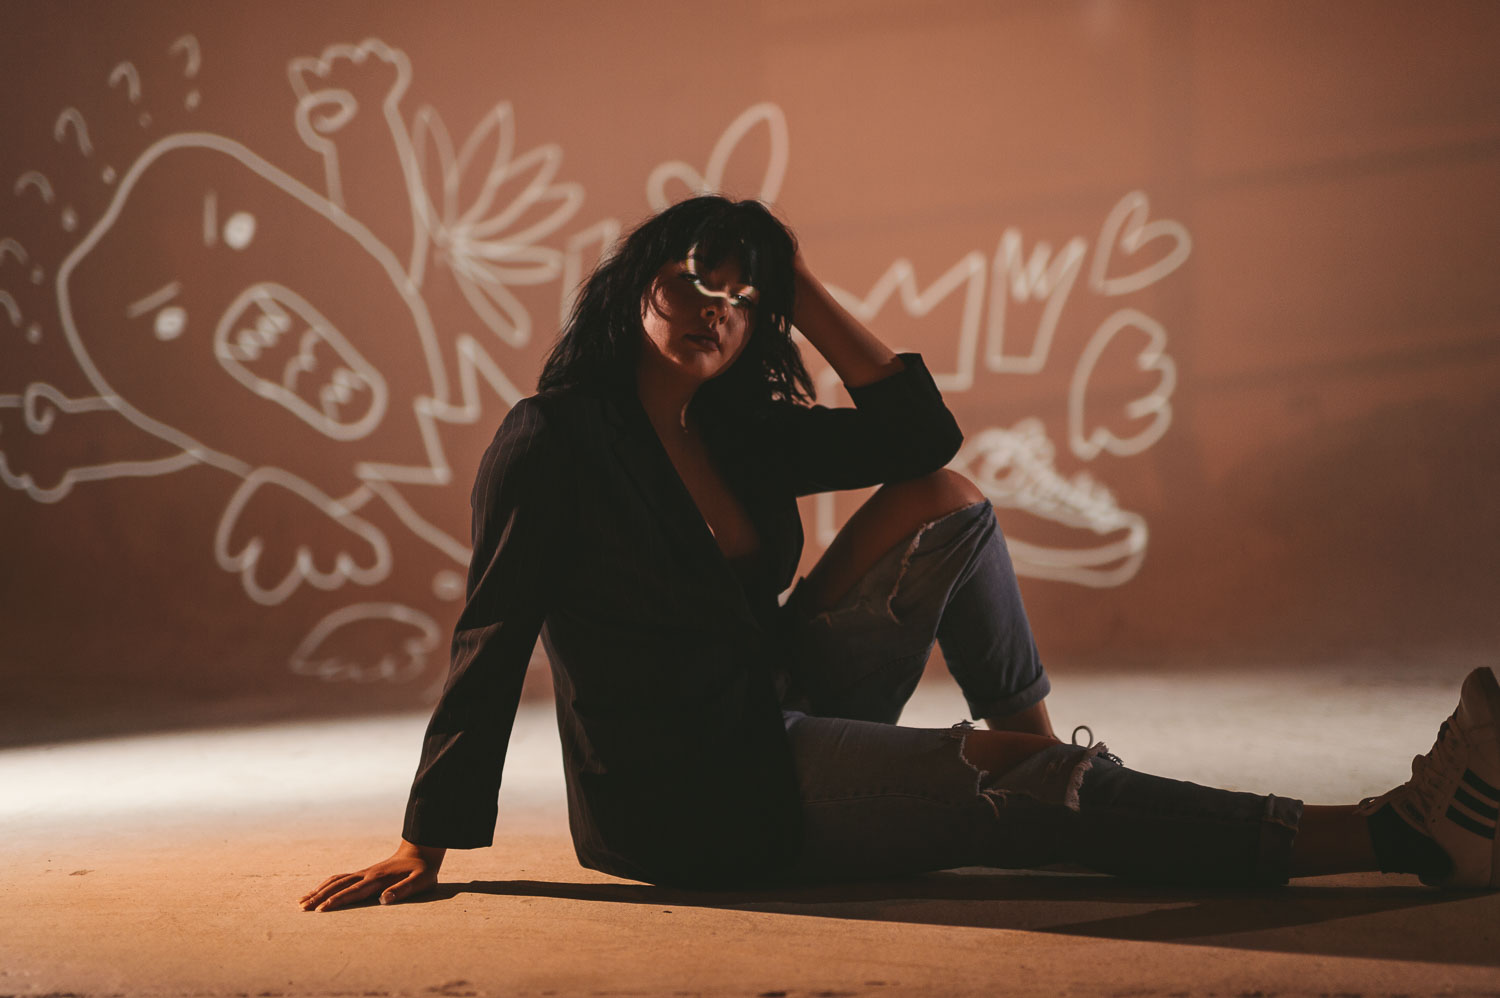 Artwalk Self Projection with woman with black hair wearing torn jeans and sneakers posing for camera sitting on the floor with part of white artwork being projected on her